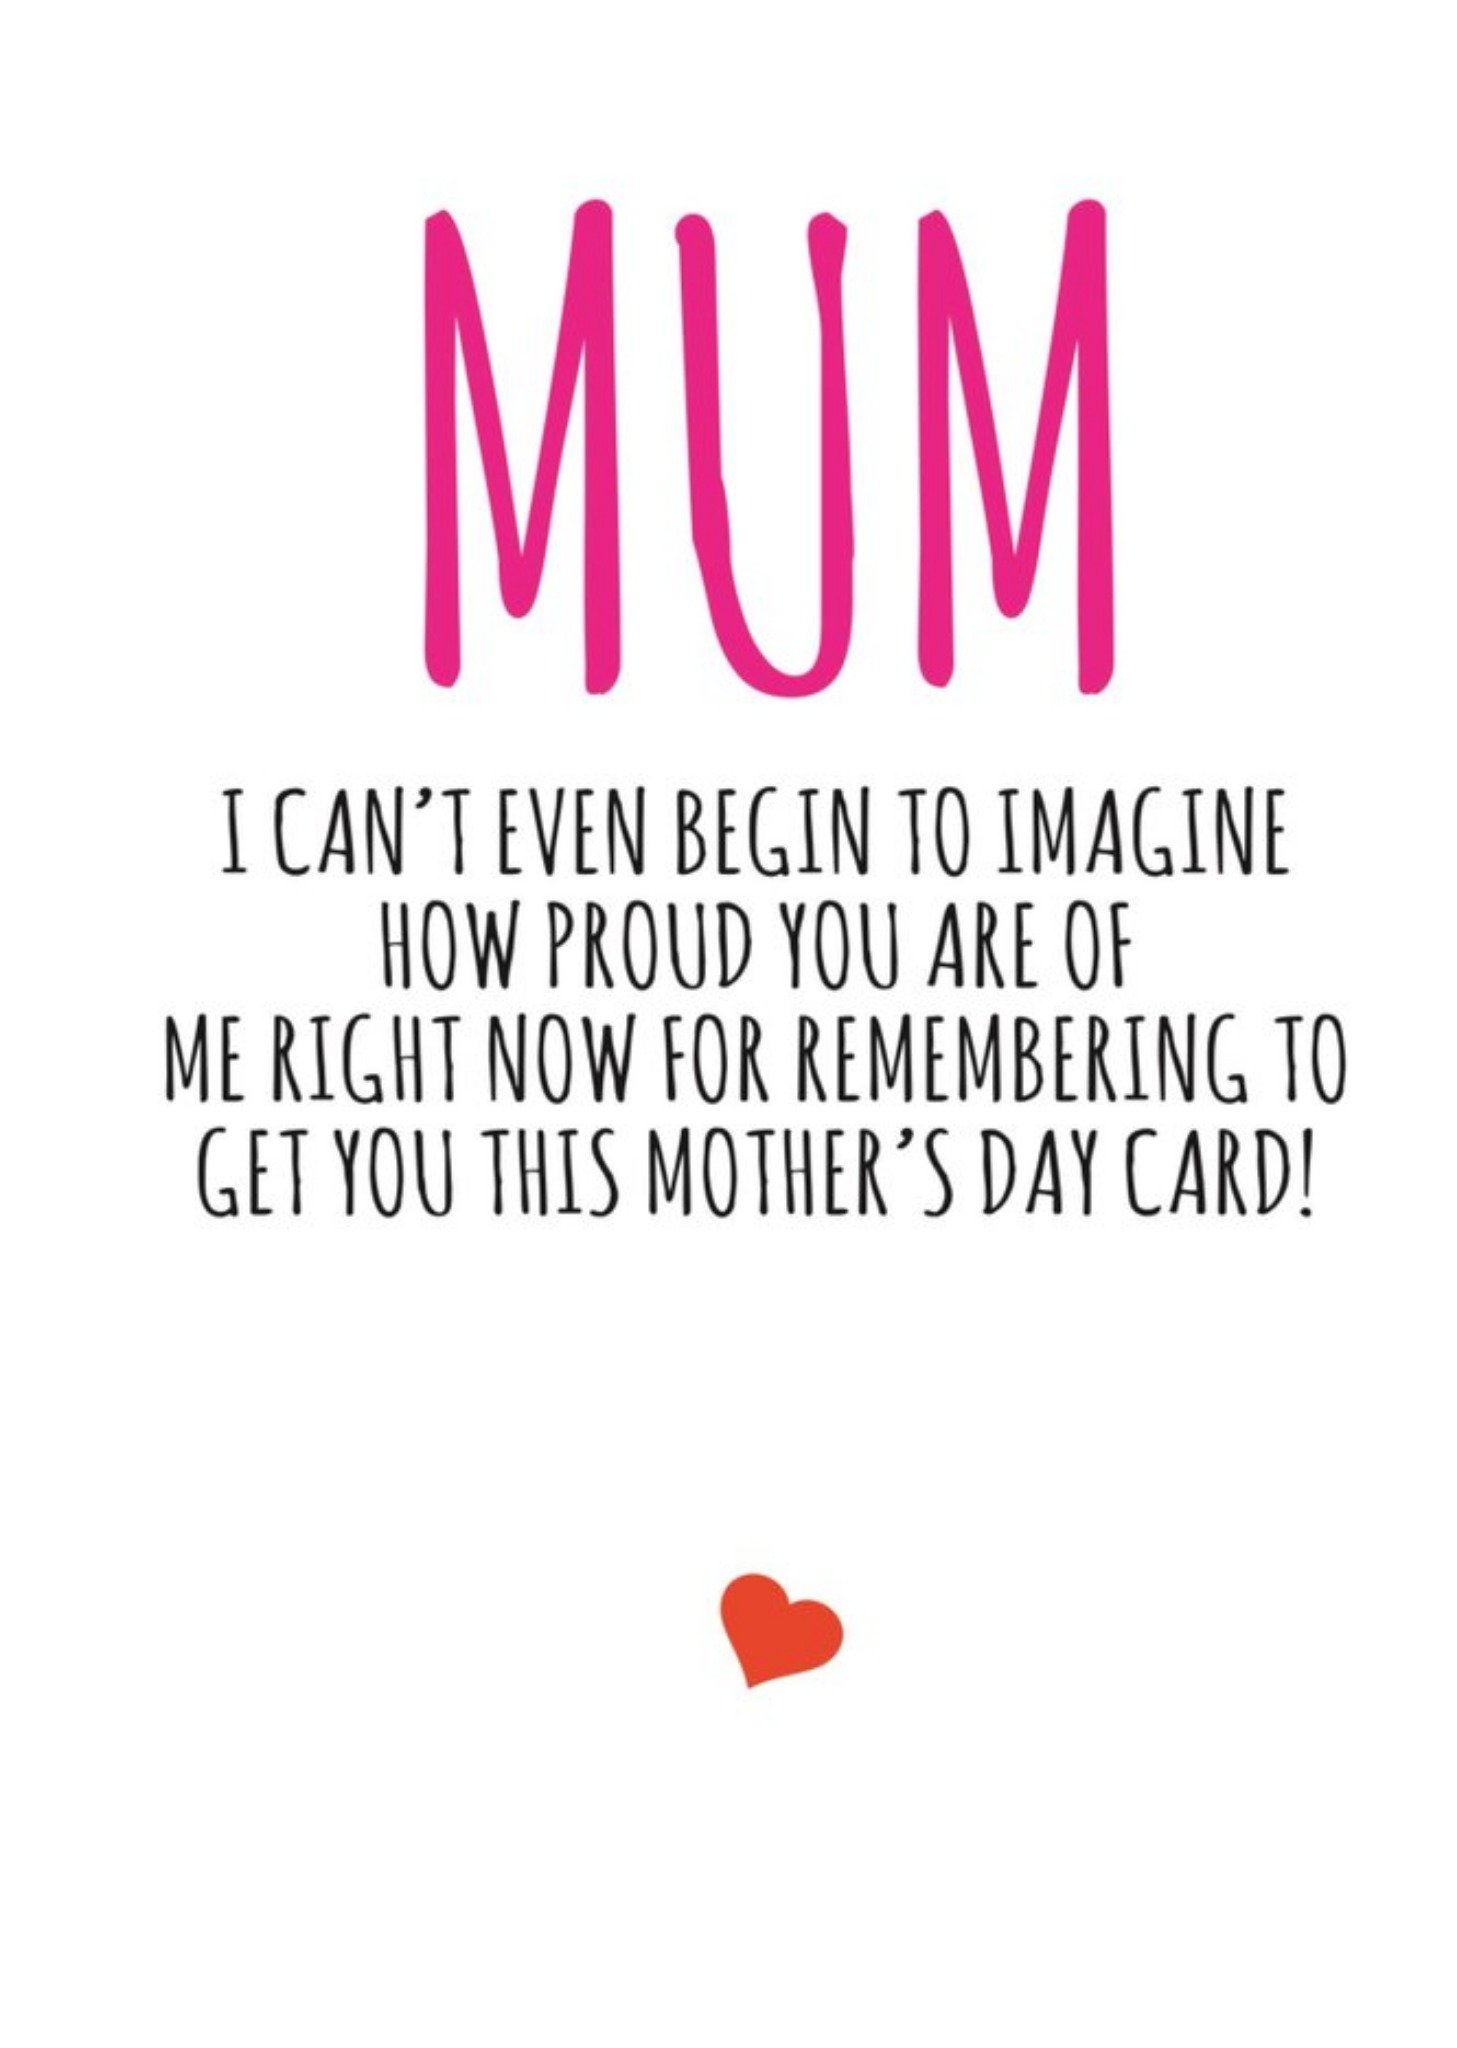 Banter King Typographical Mum I Cant Even Begin To Imagine How Proud You Are Of Me Card Ecard